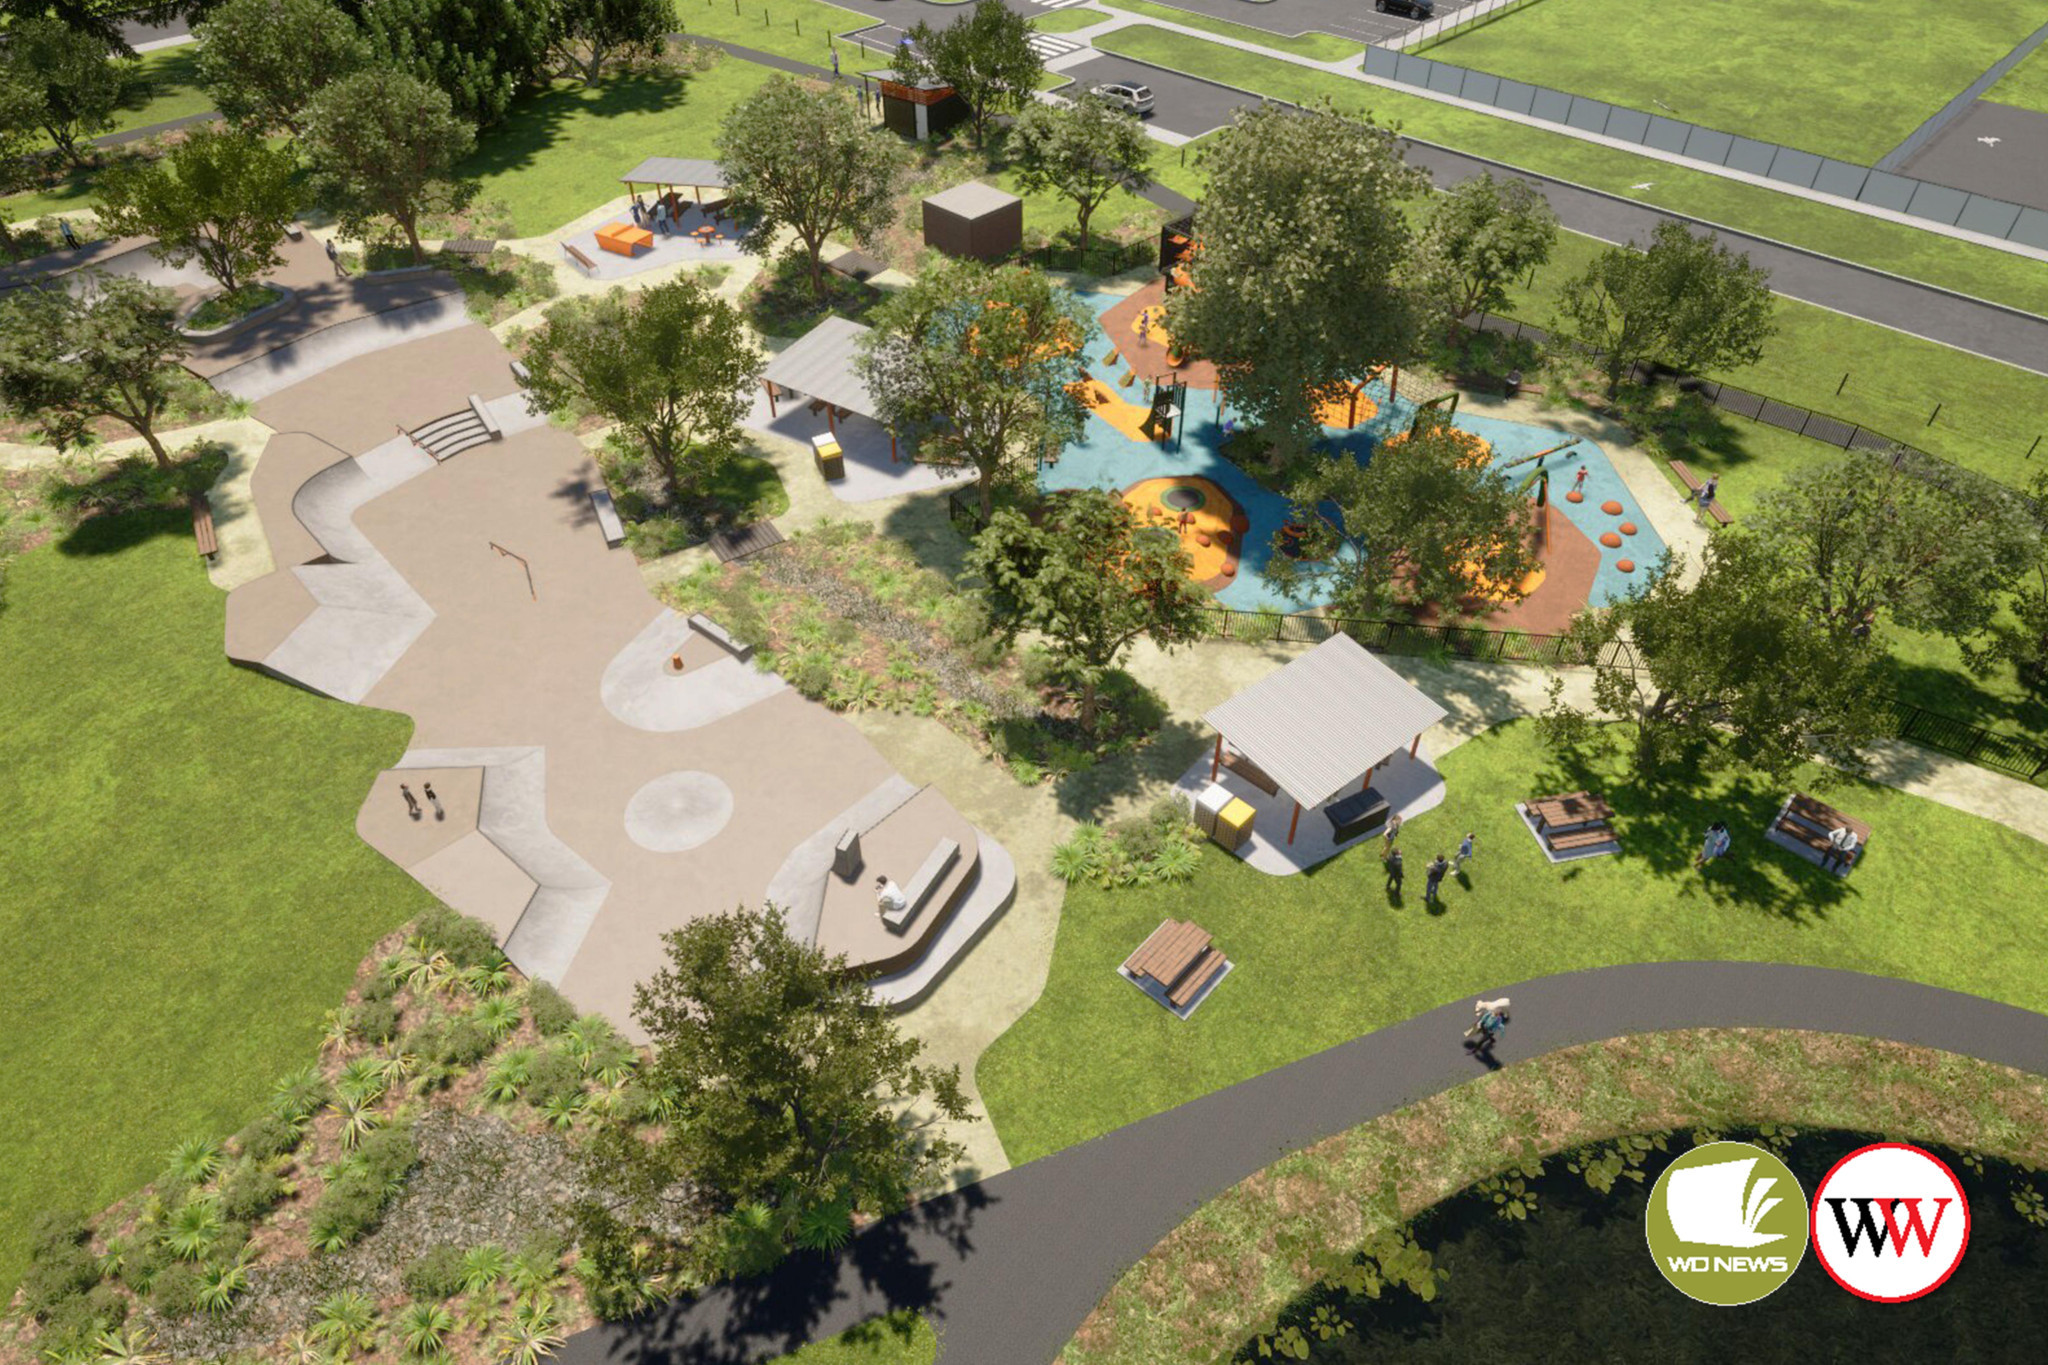 The concept design for the new Port Fairy skatepark and play space.